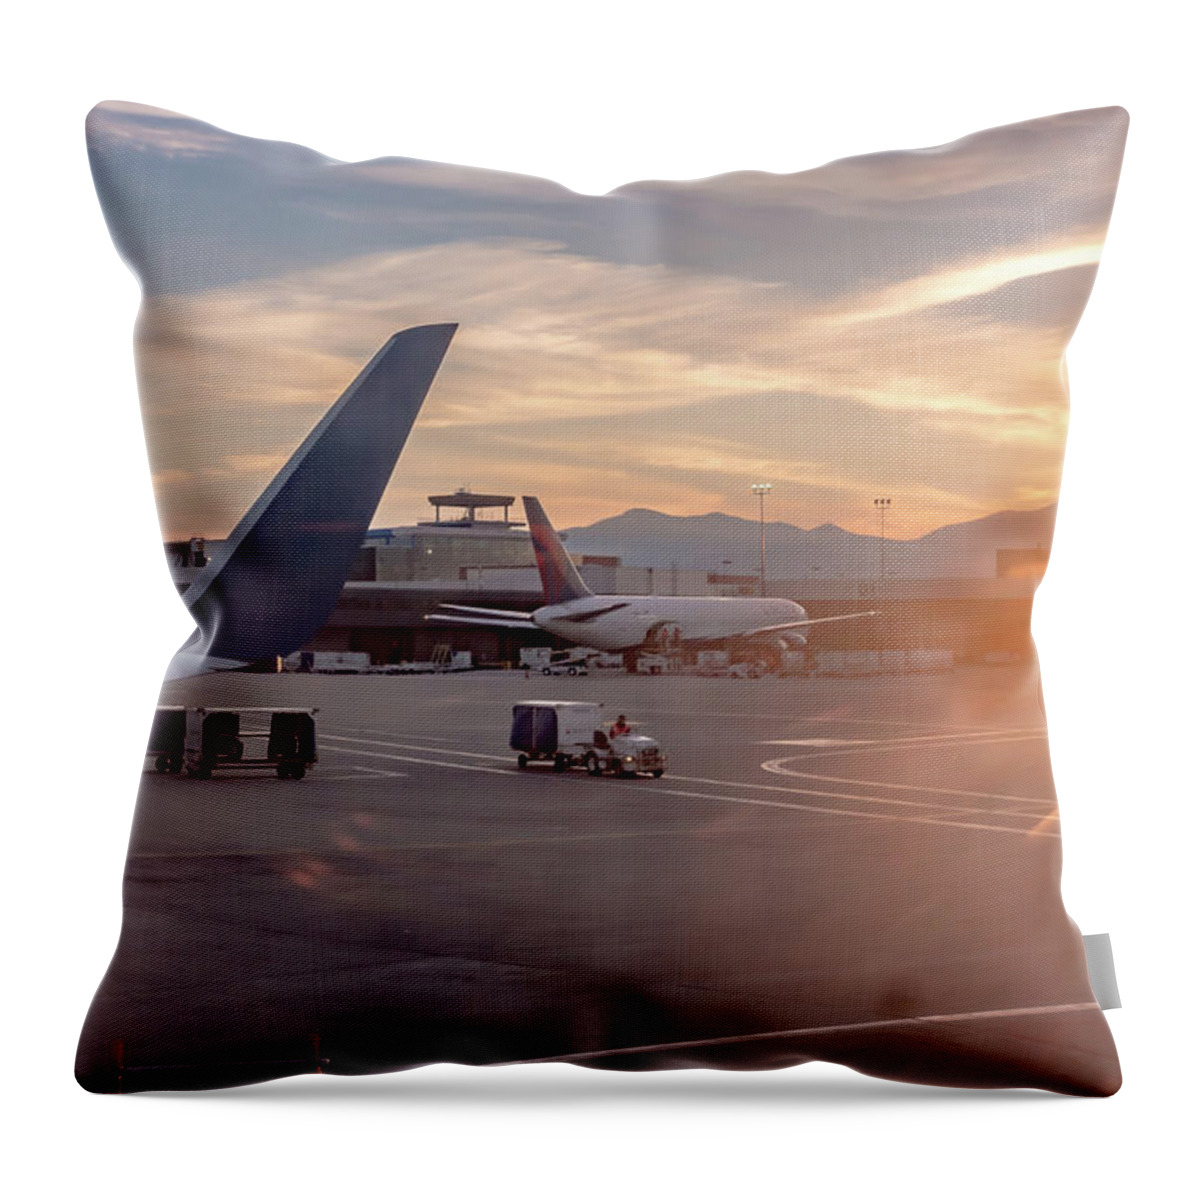 Flying Throw Pillow featuring the photograph Flying Over Rockies In Airplane From Salt Lake City At Sunset #26 by Alex Grichenko